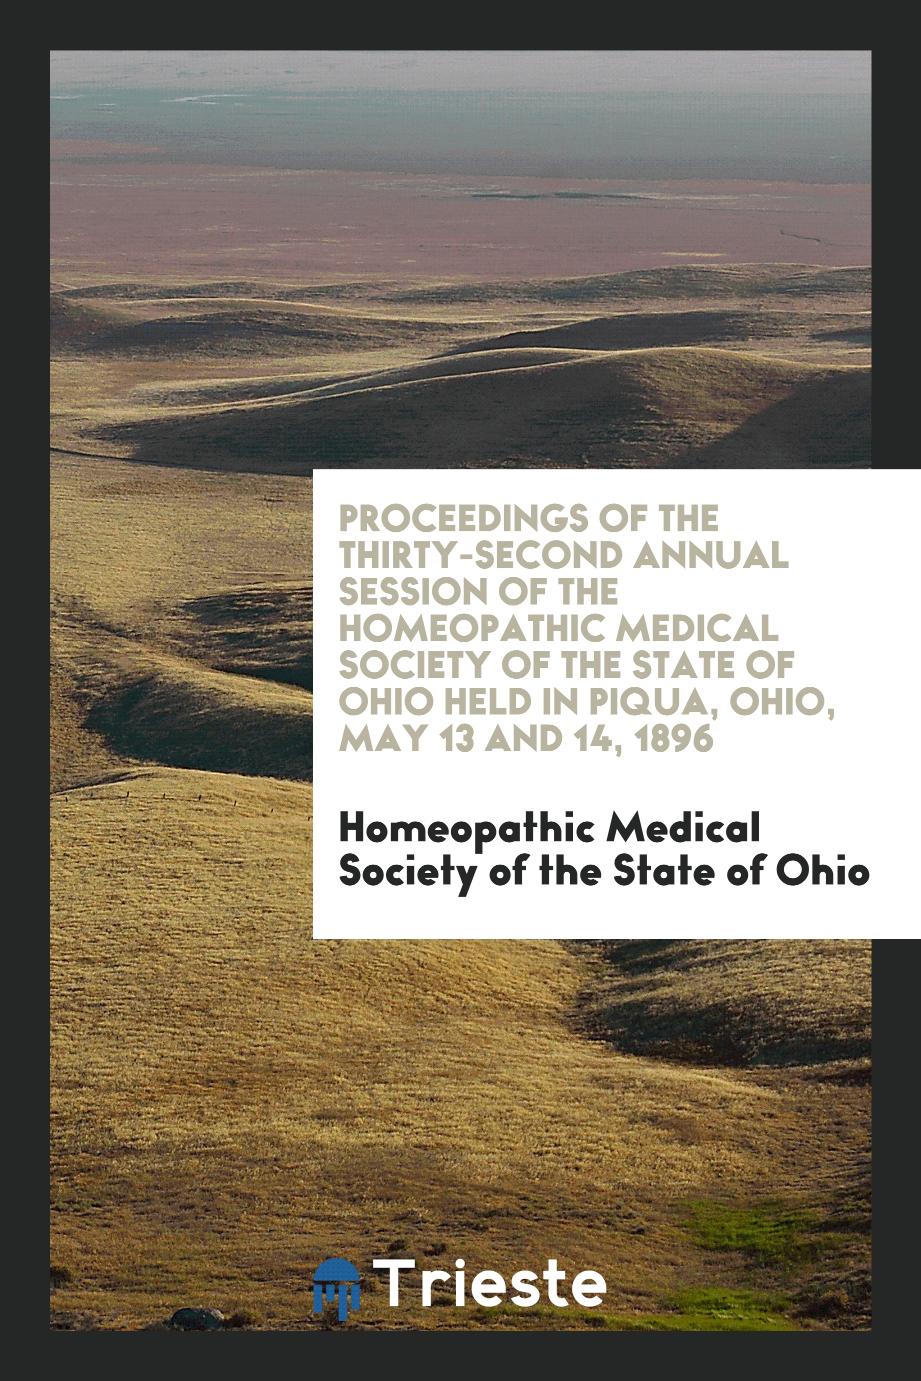 Proceedings of the Thirty-Second Annual Session of the Homeopathic Medical Society of the State of Ohio Held in Piqua, Ohio, May 13 and 14, 1896